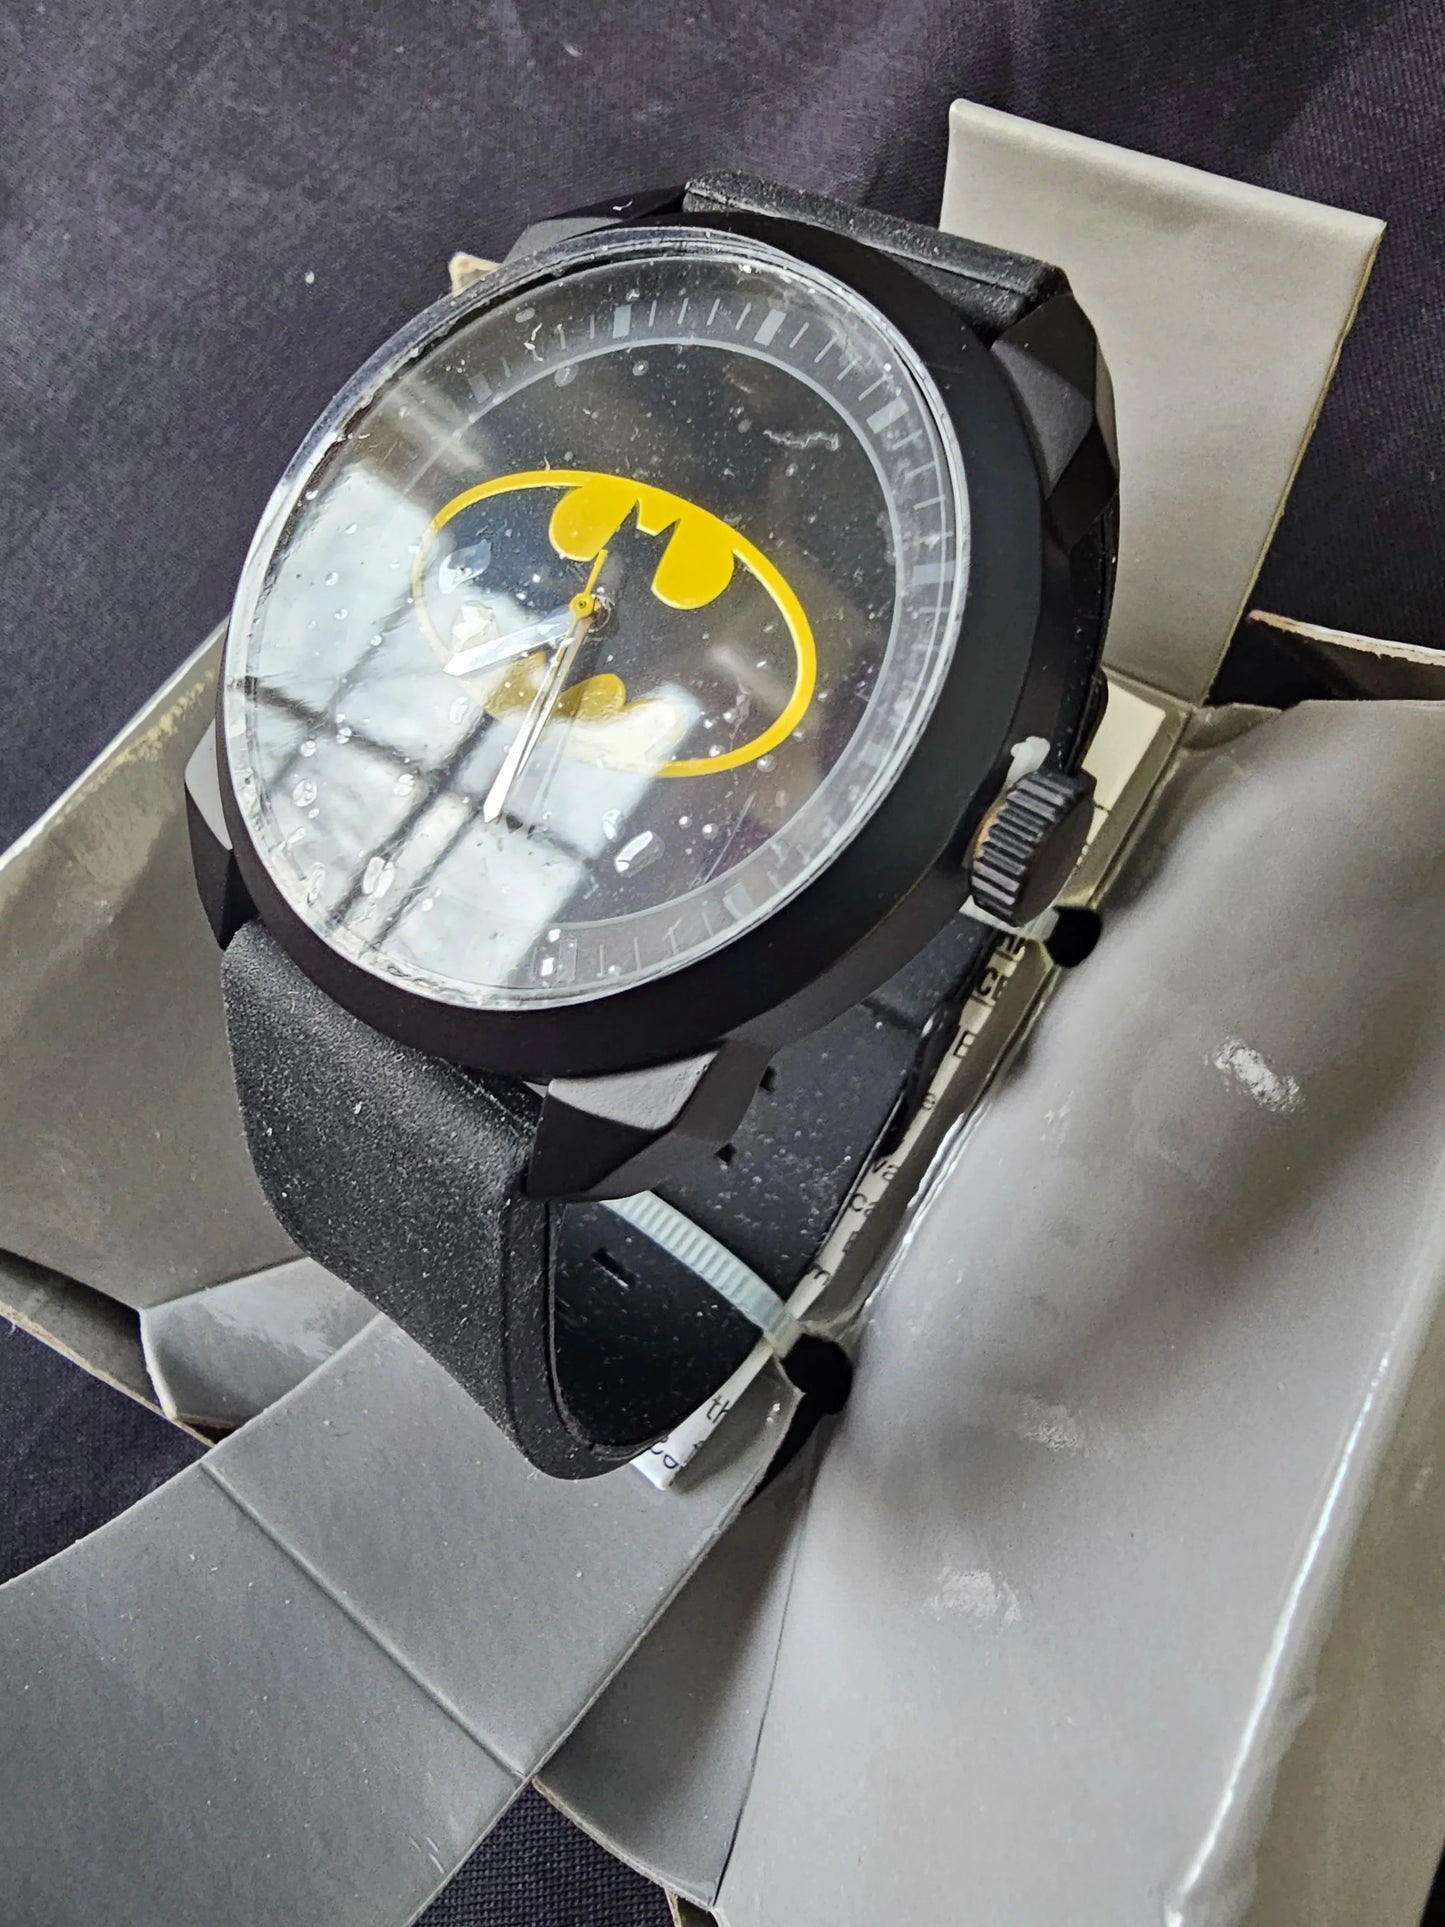 Batman DC Comics Logo Watch by Accutime with Collectible Box